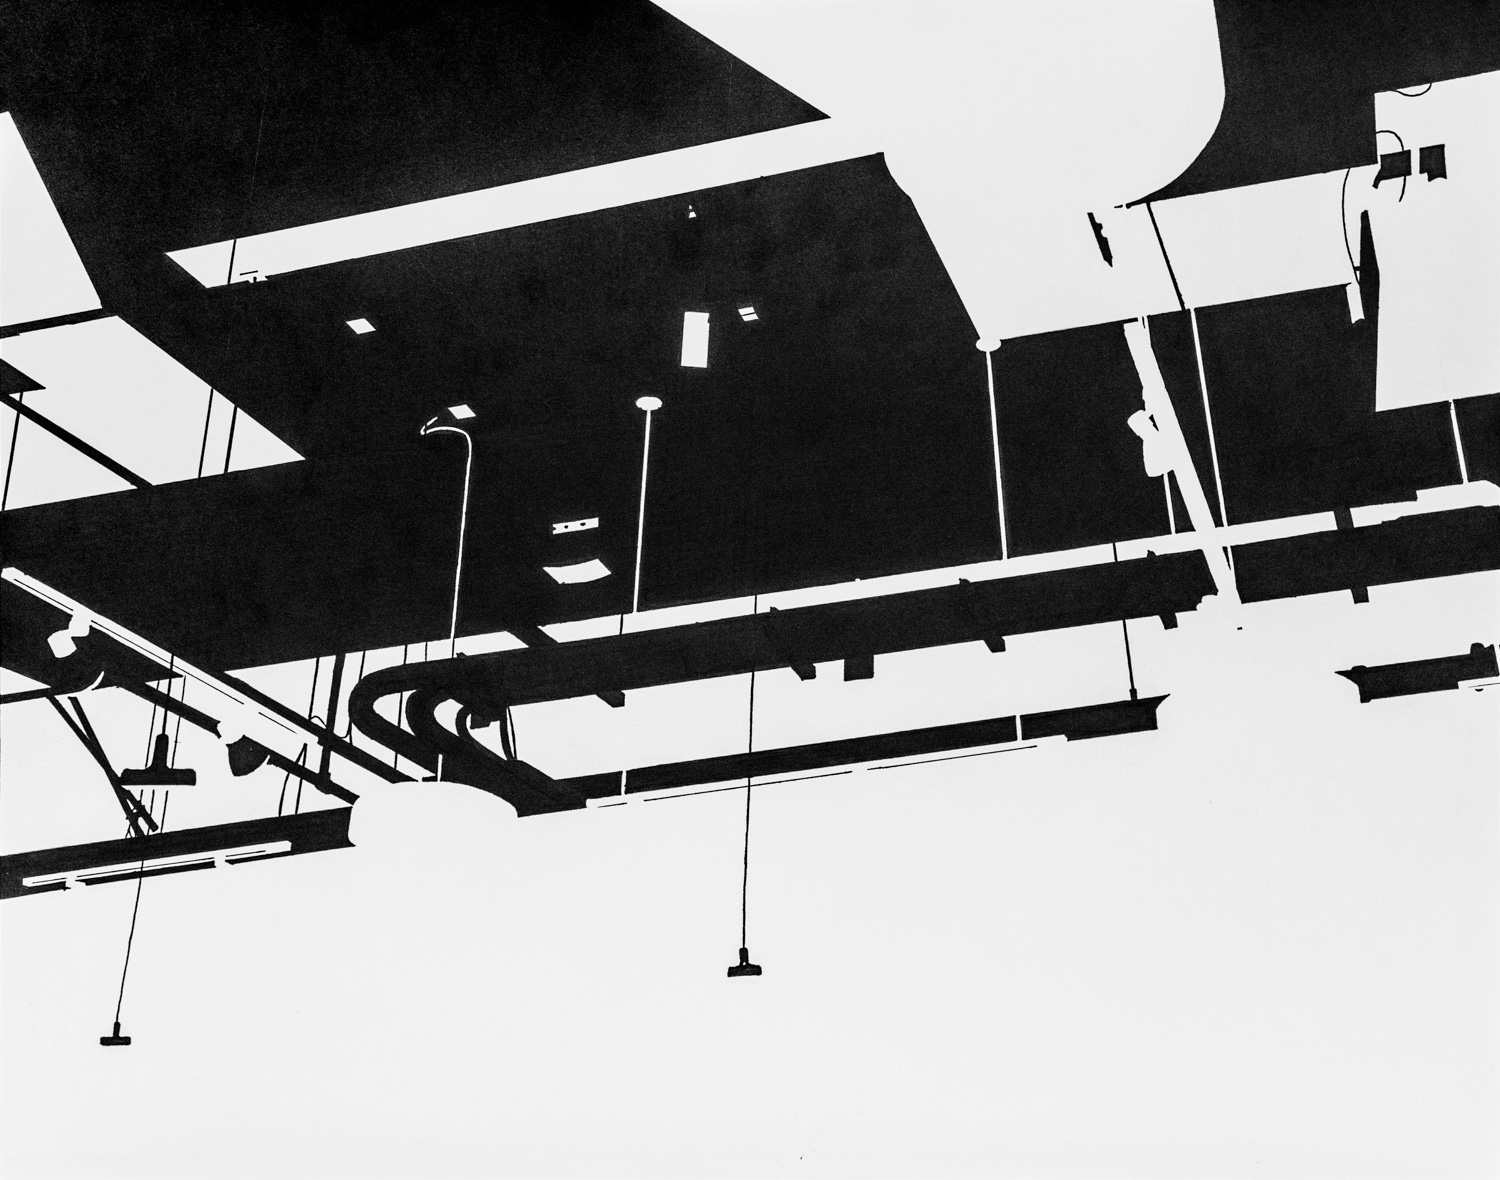 Negative space marker drawing of a studio ceiling filled with pipes and air ducts.